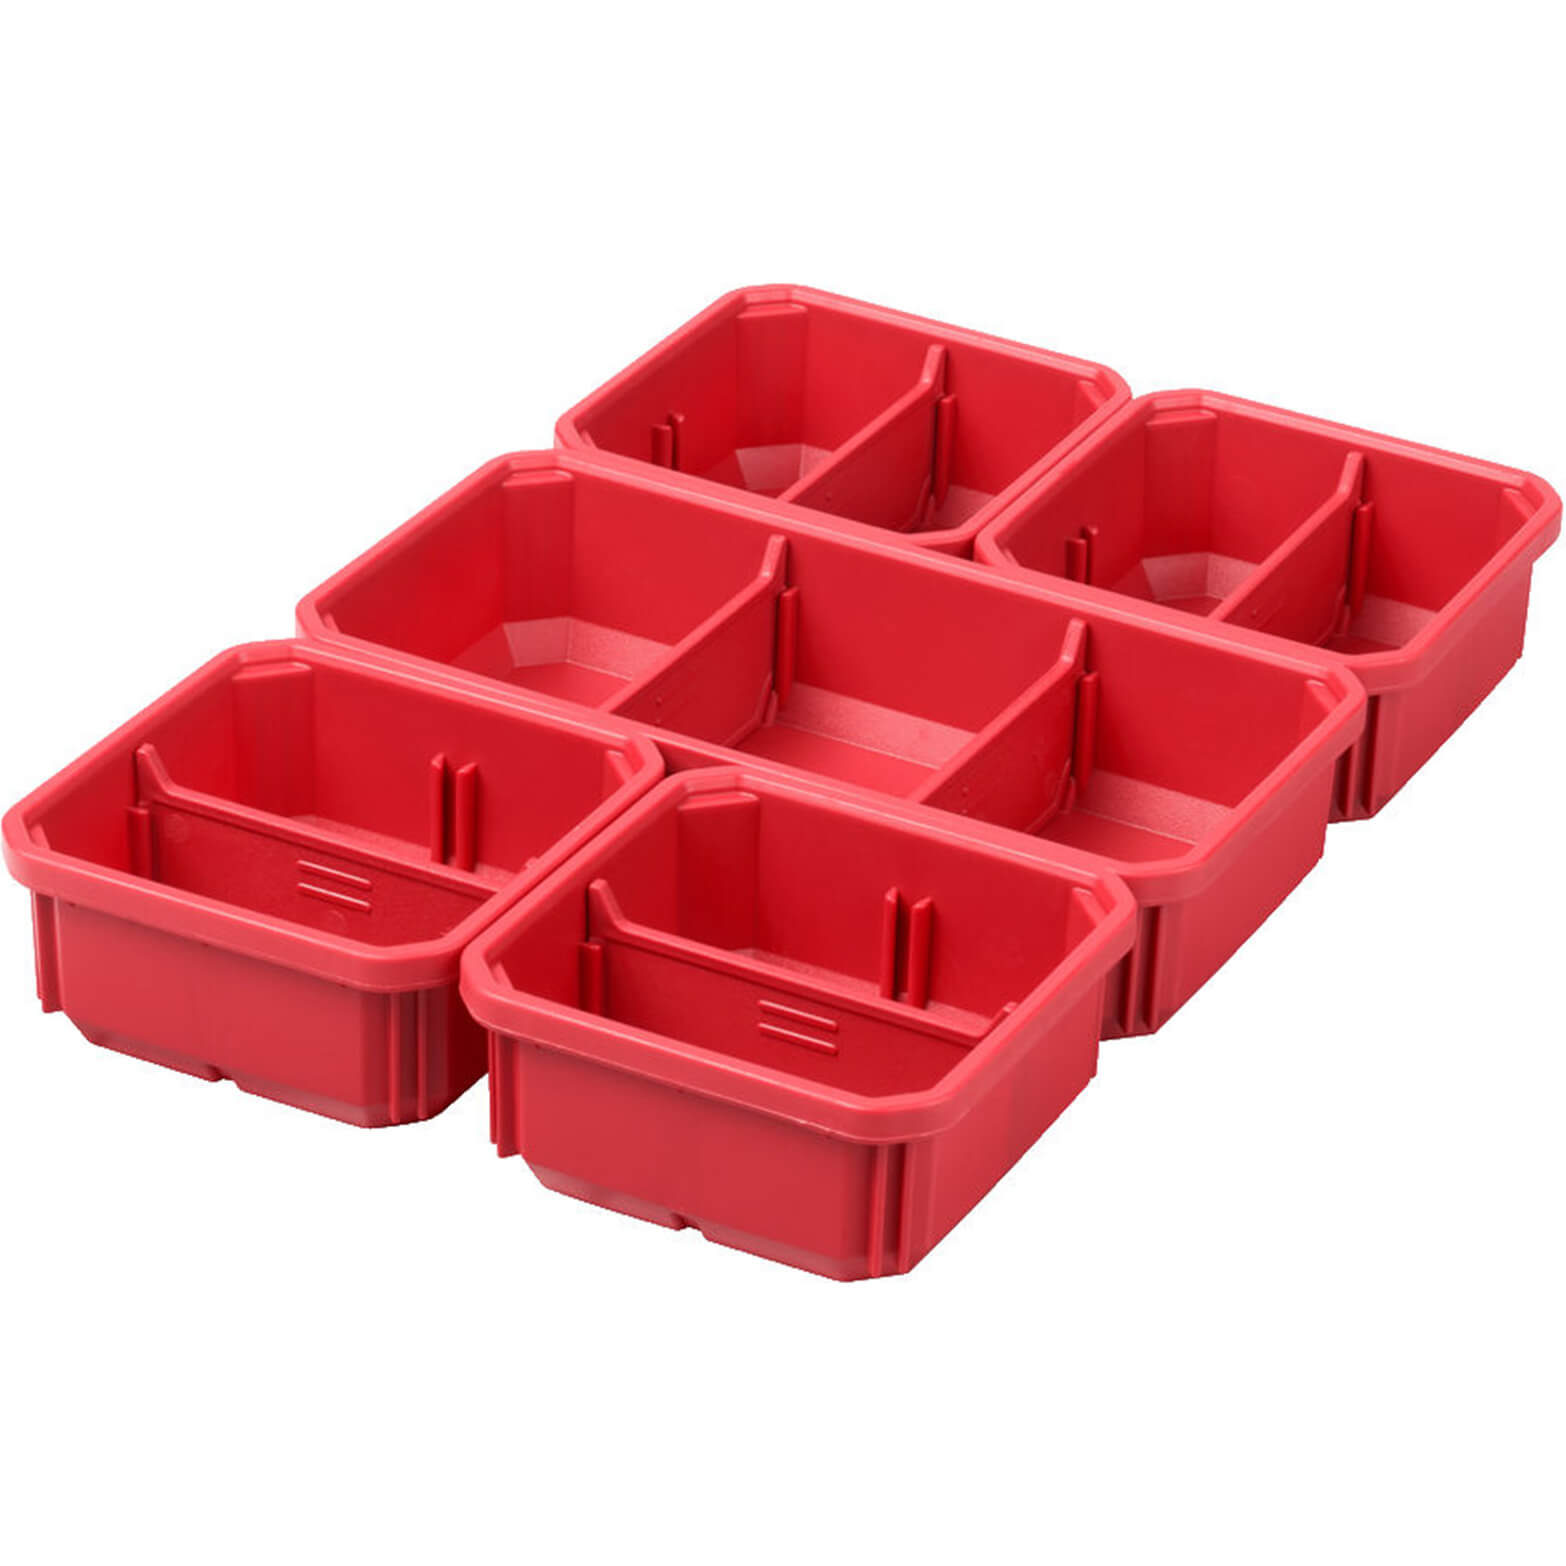 Image of Milwaukee Bins for Packout Slim Organizer and Compact Slim Organizer